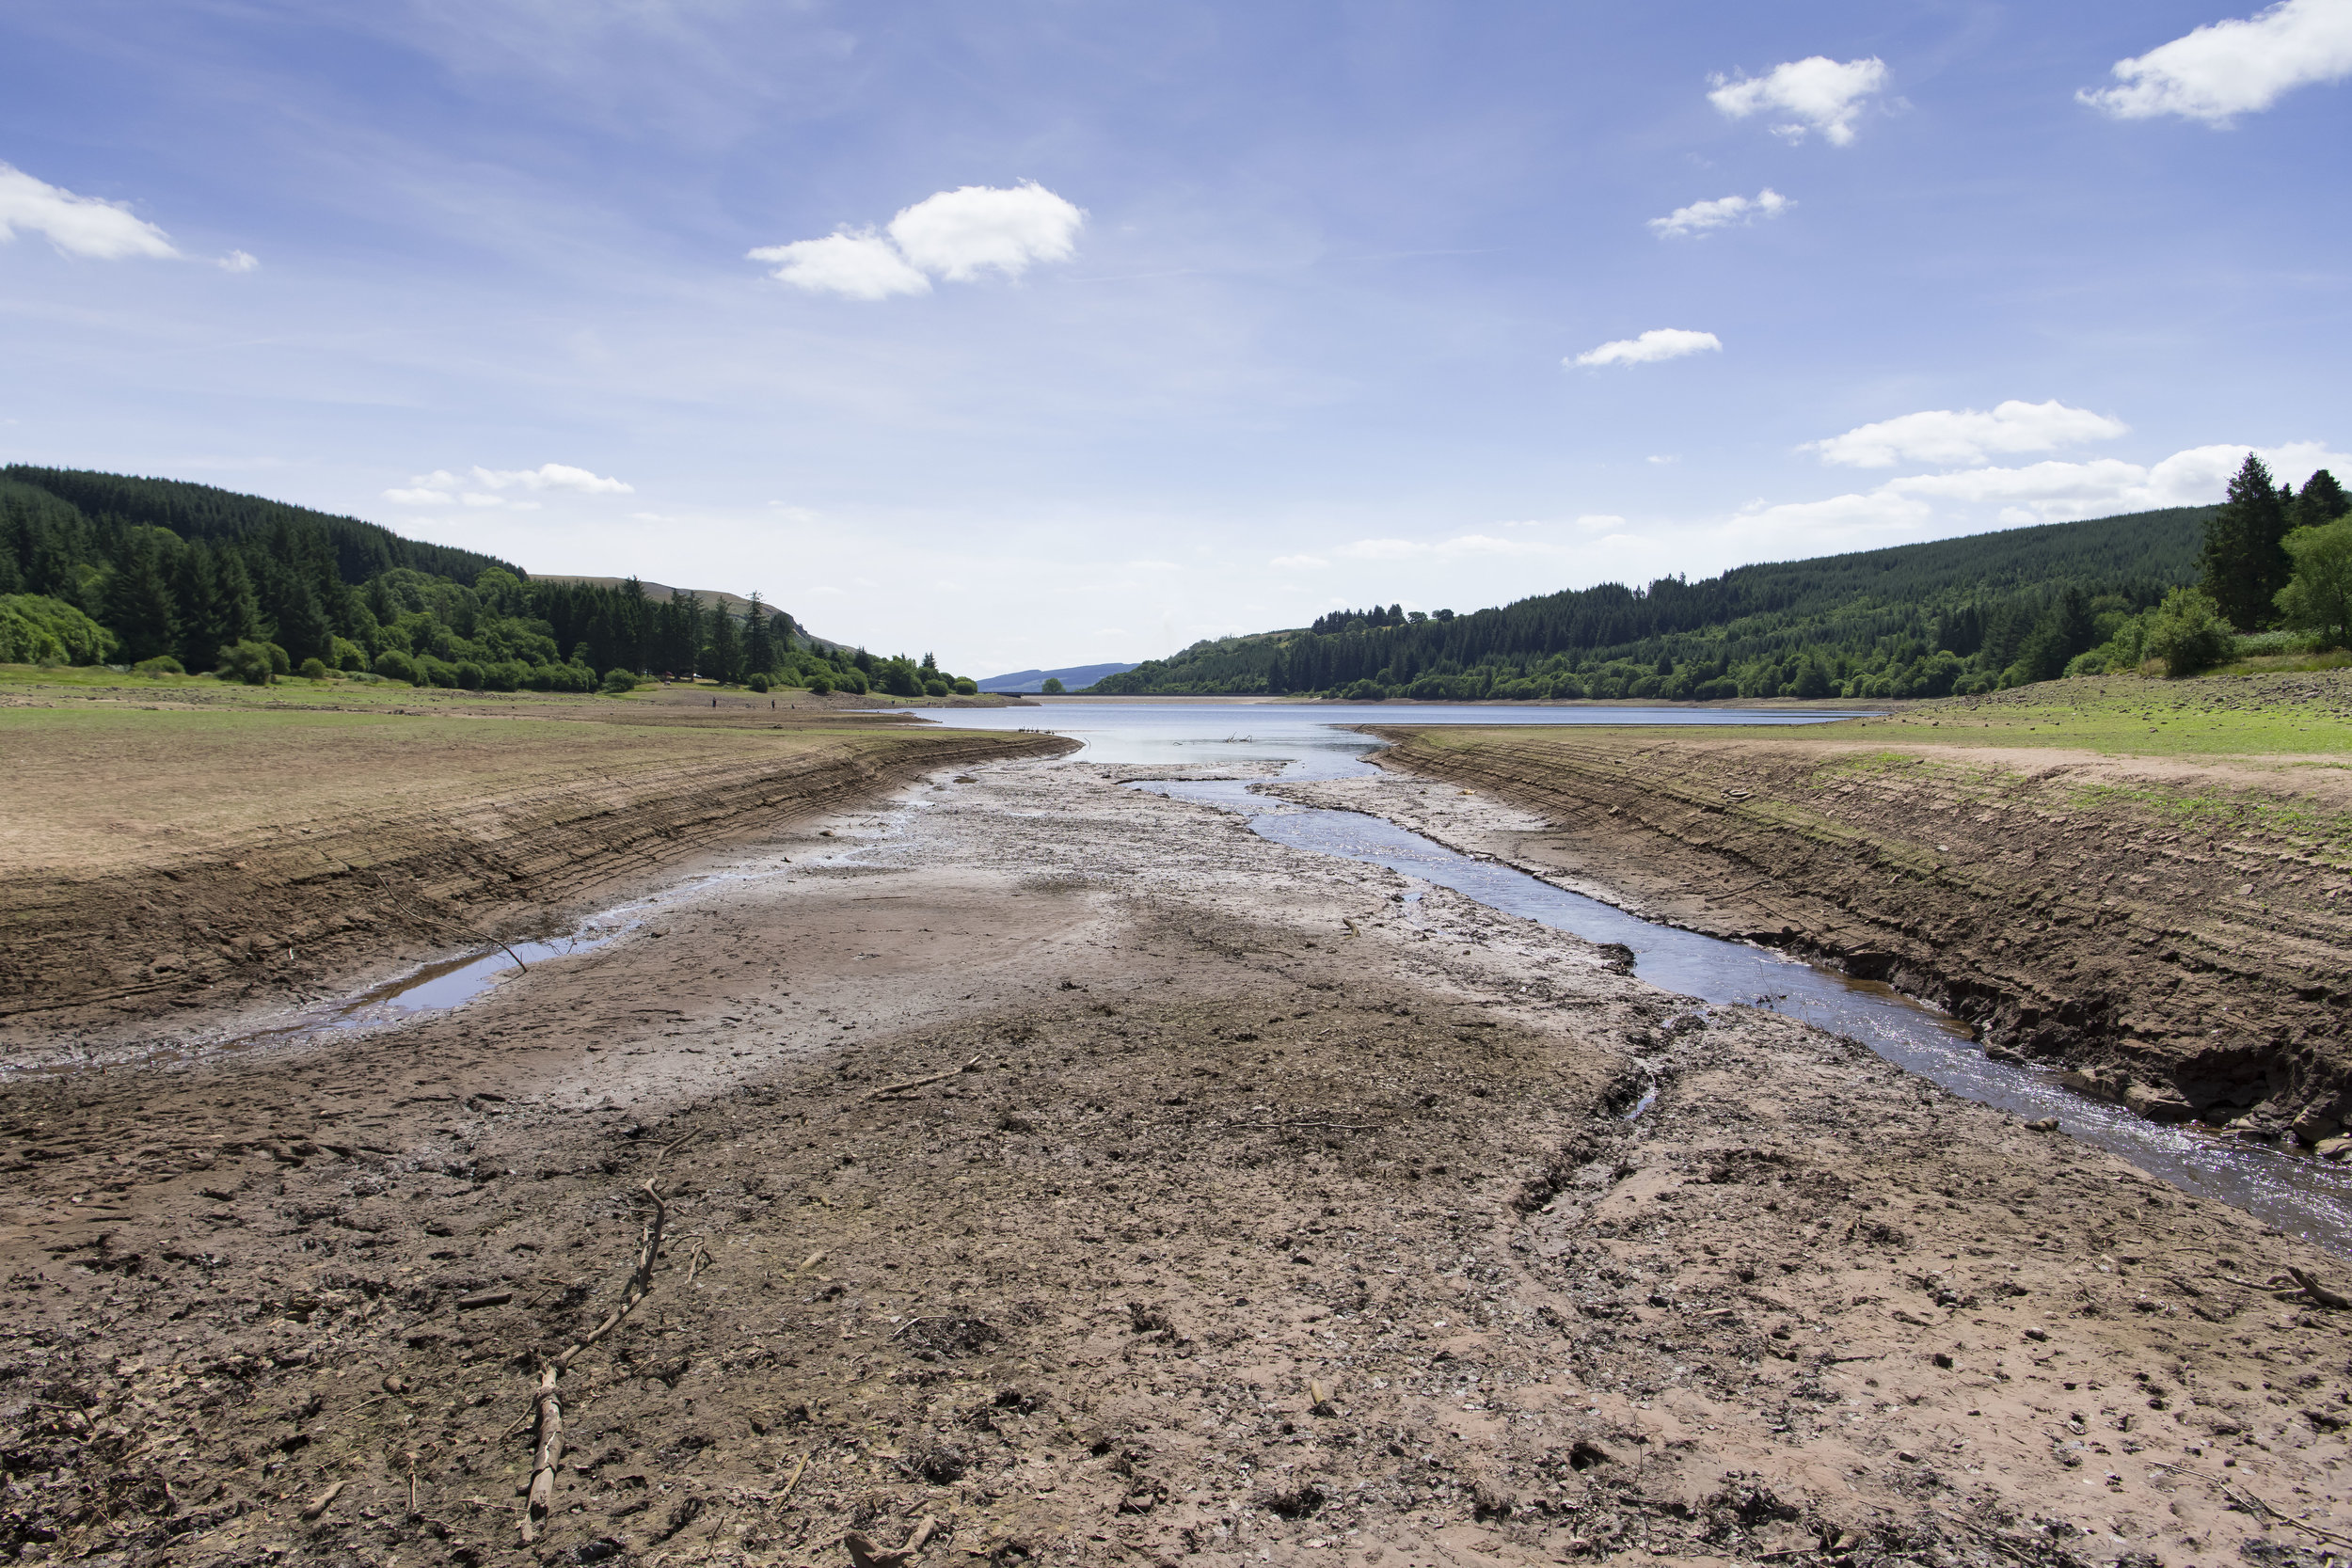  MERTHYR TYDFIL, WALES - JULY 25: A general view of the Llwyn-on Reservoir, owned by Welsh Water, in the Taf Fawr valley on July 25, 2018 in Merthyr Tydfil, Wales. The lack of rainfall over the last few weeks combined with record breaking temperature